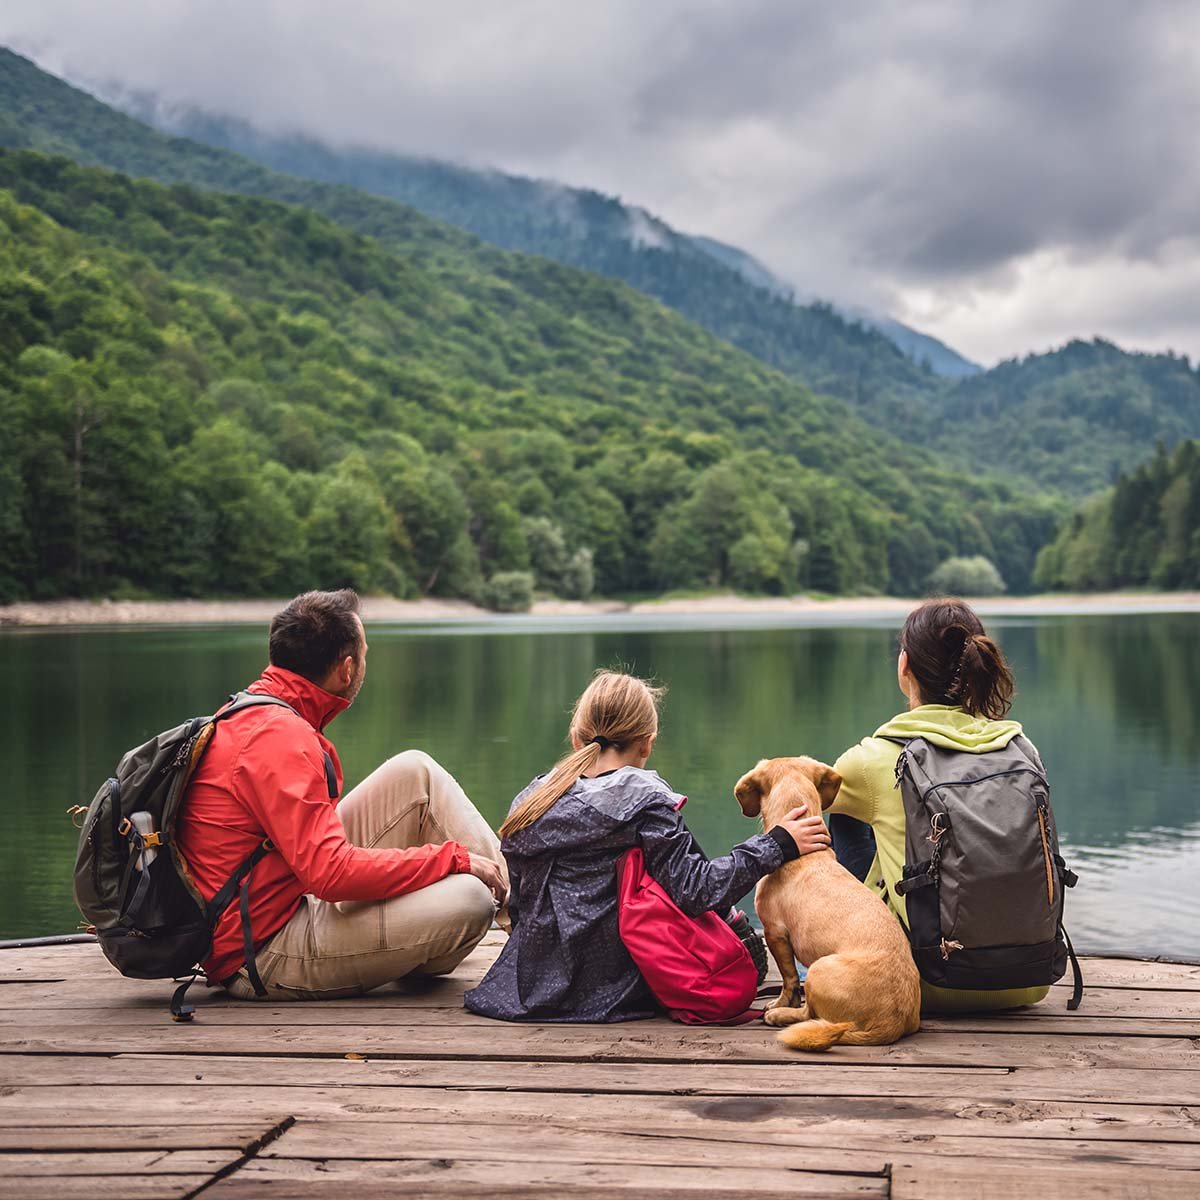 A family of four sits on a dock near a mountain lake while on vacation.